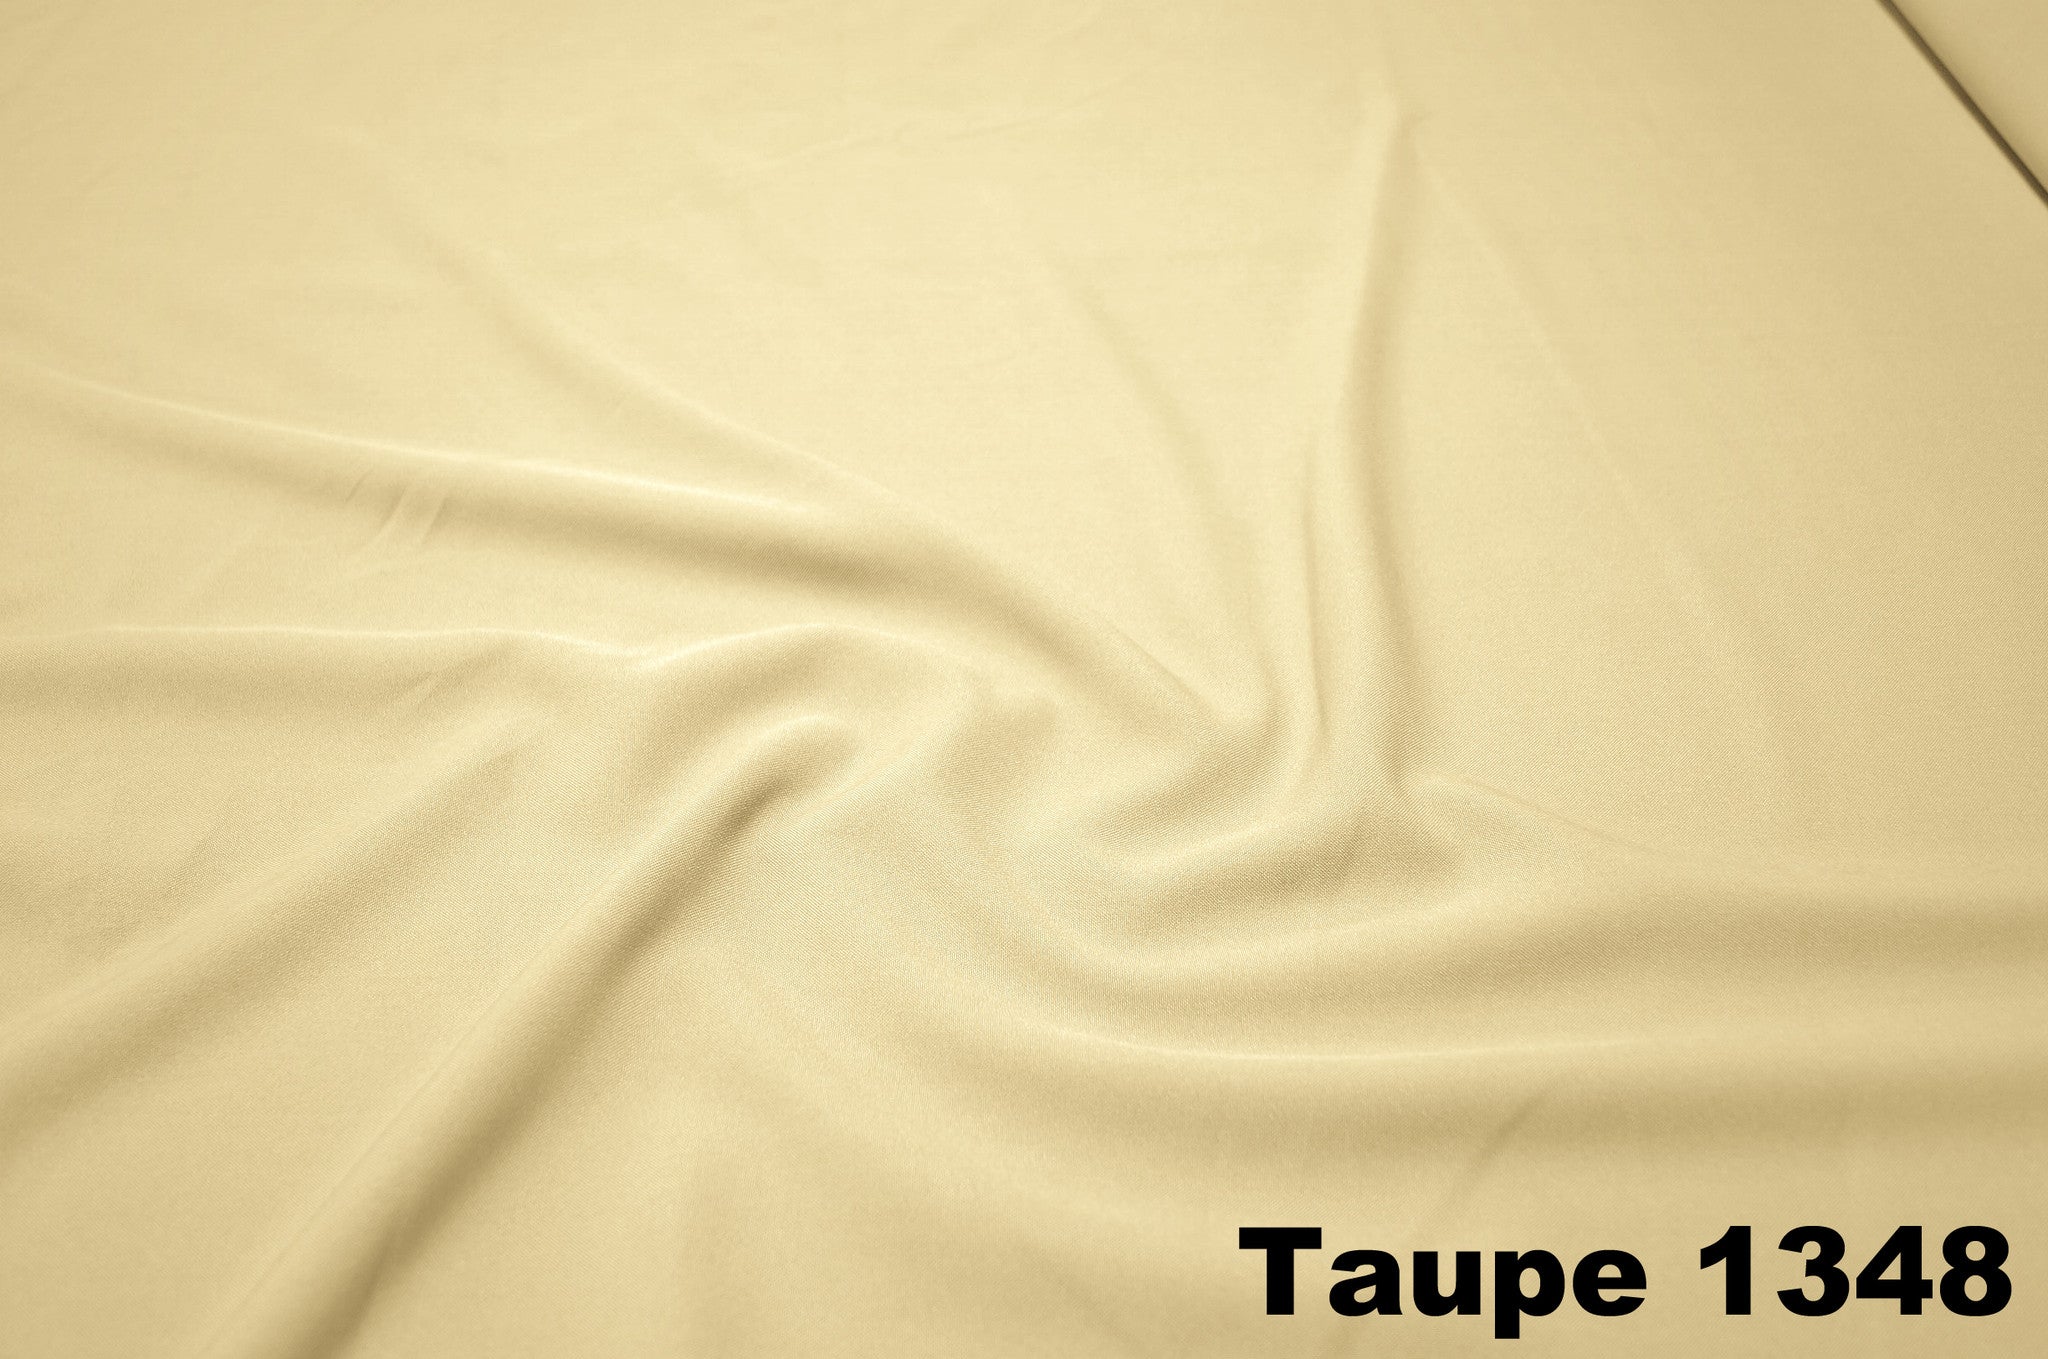 TAUPE 1348